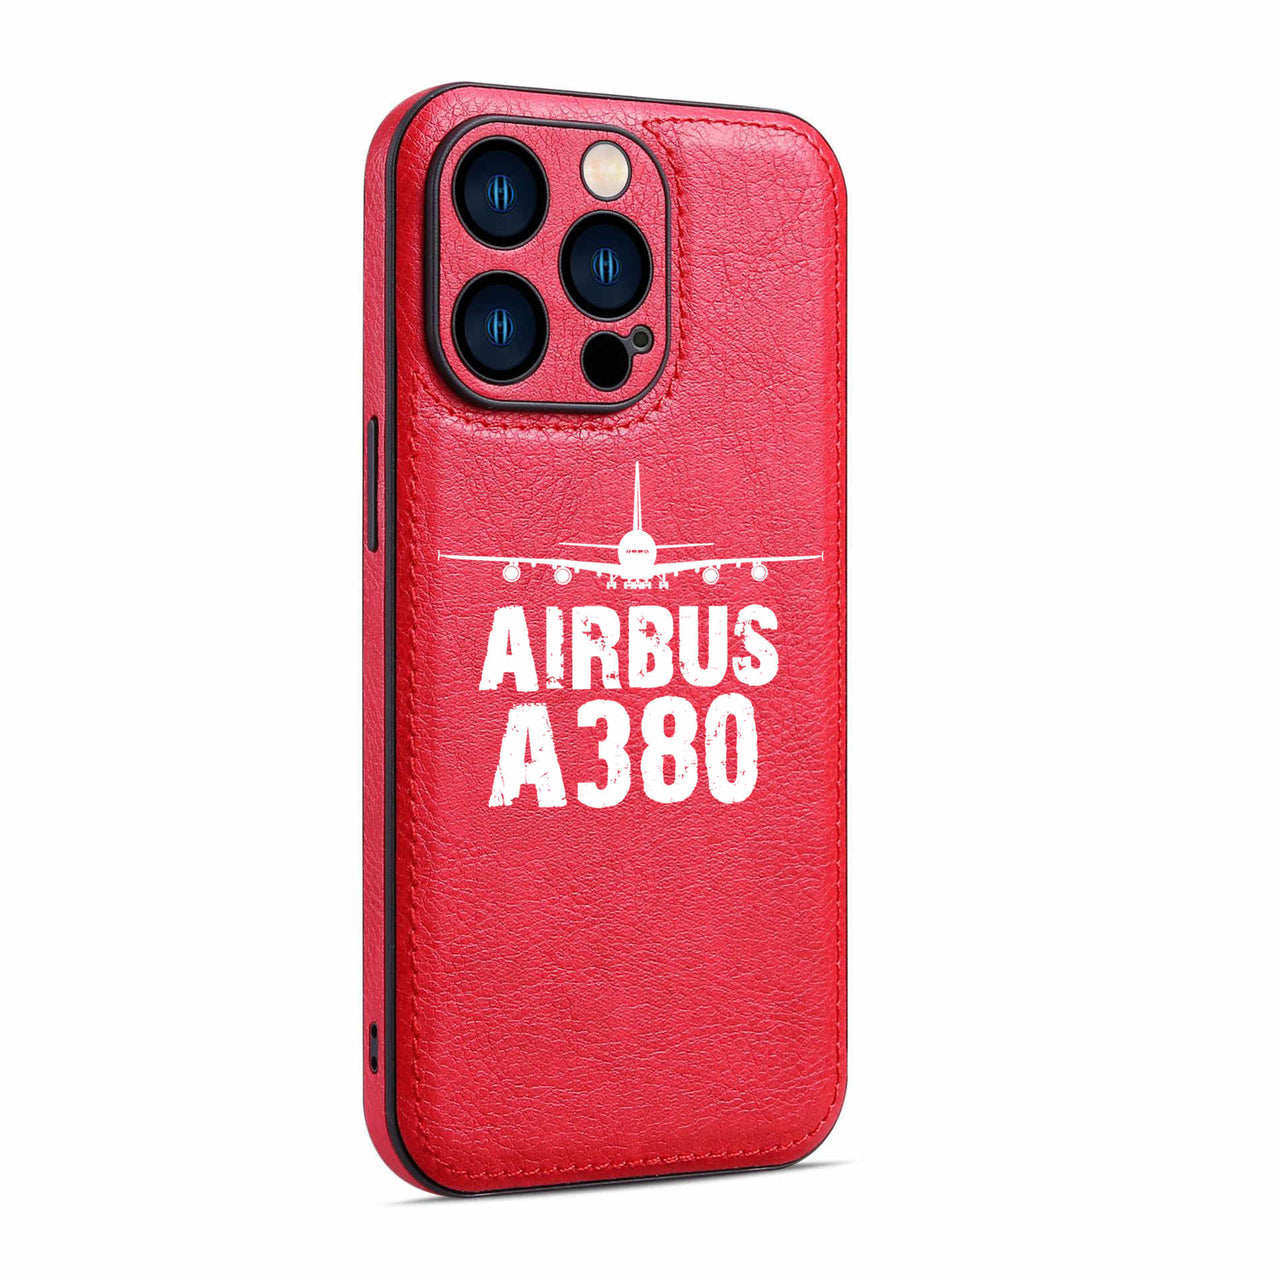 Airbus A380 & Plane Designed Leather iPhone Cases